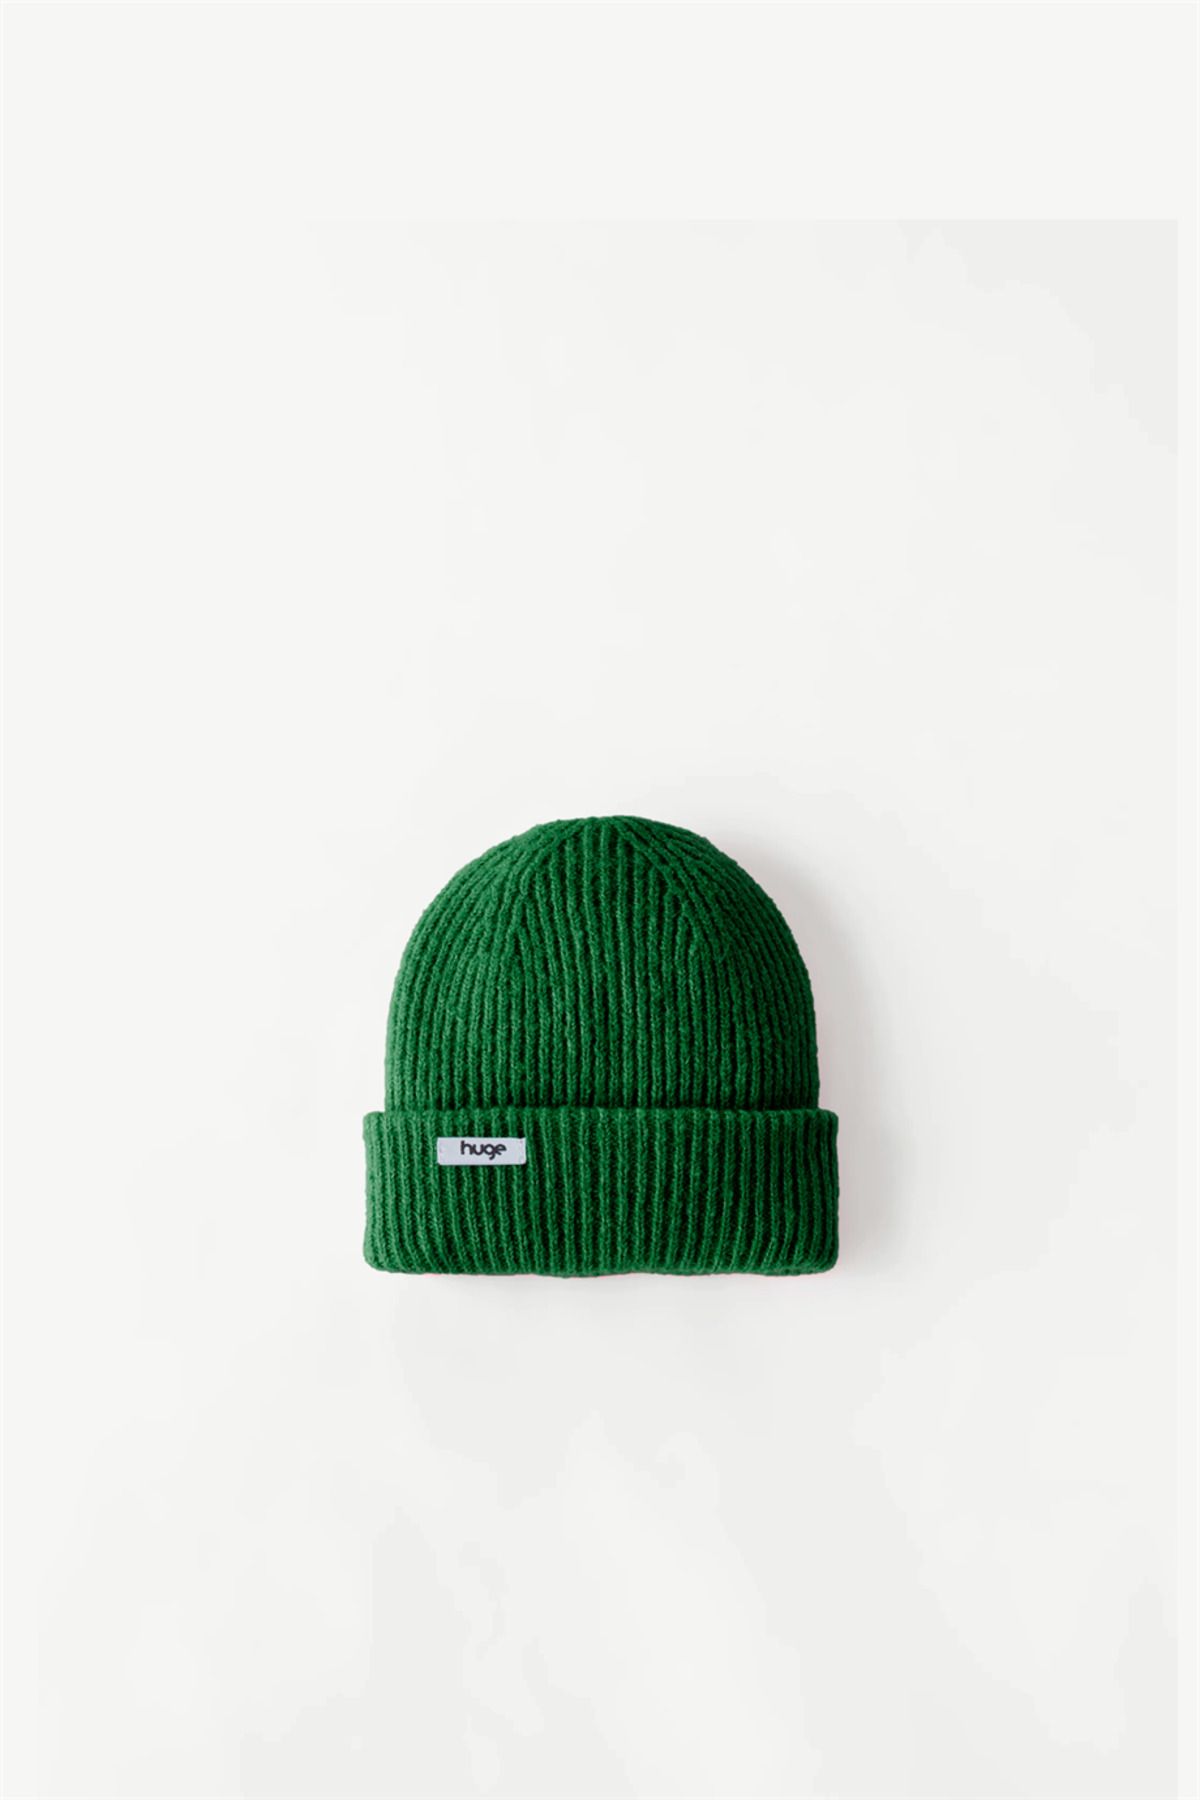 Huge Element Huge Beanie Small Tag Green